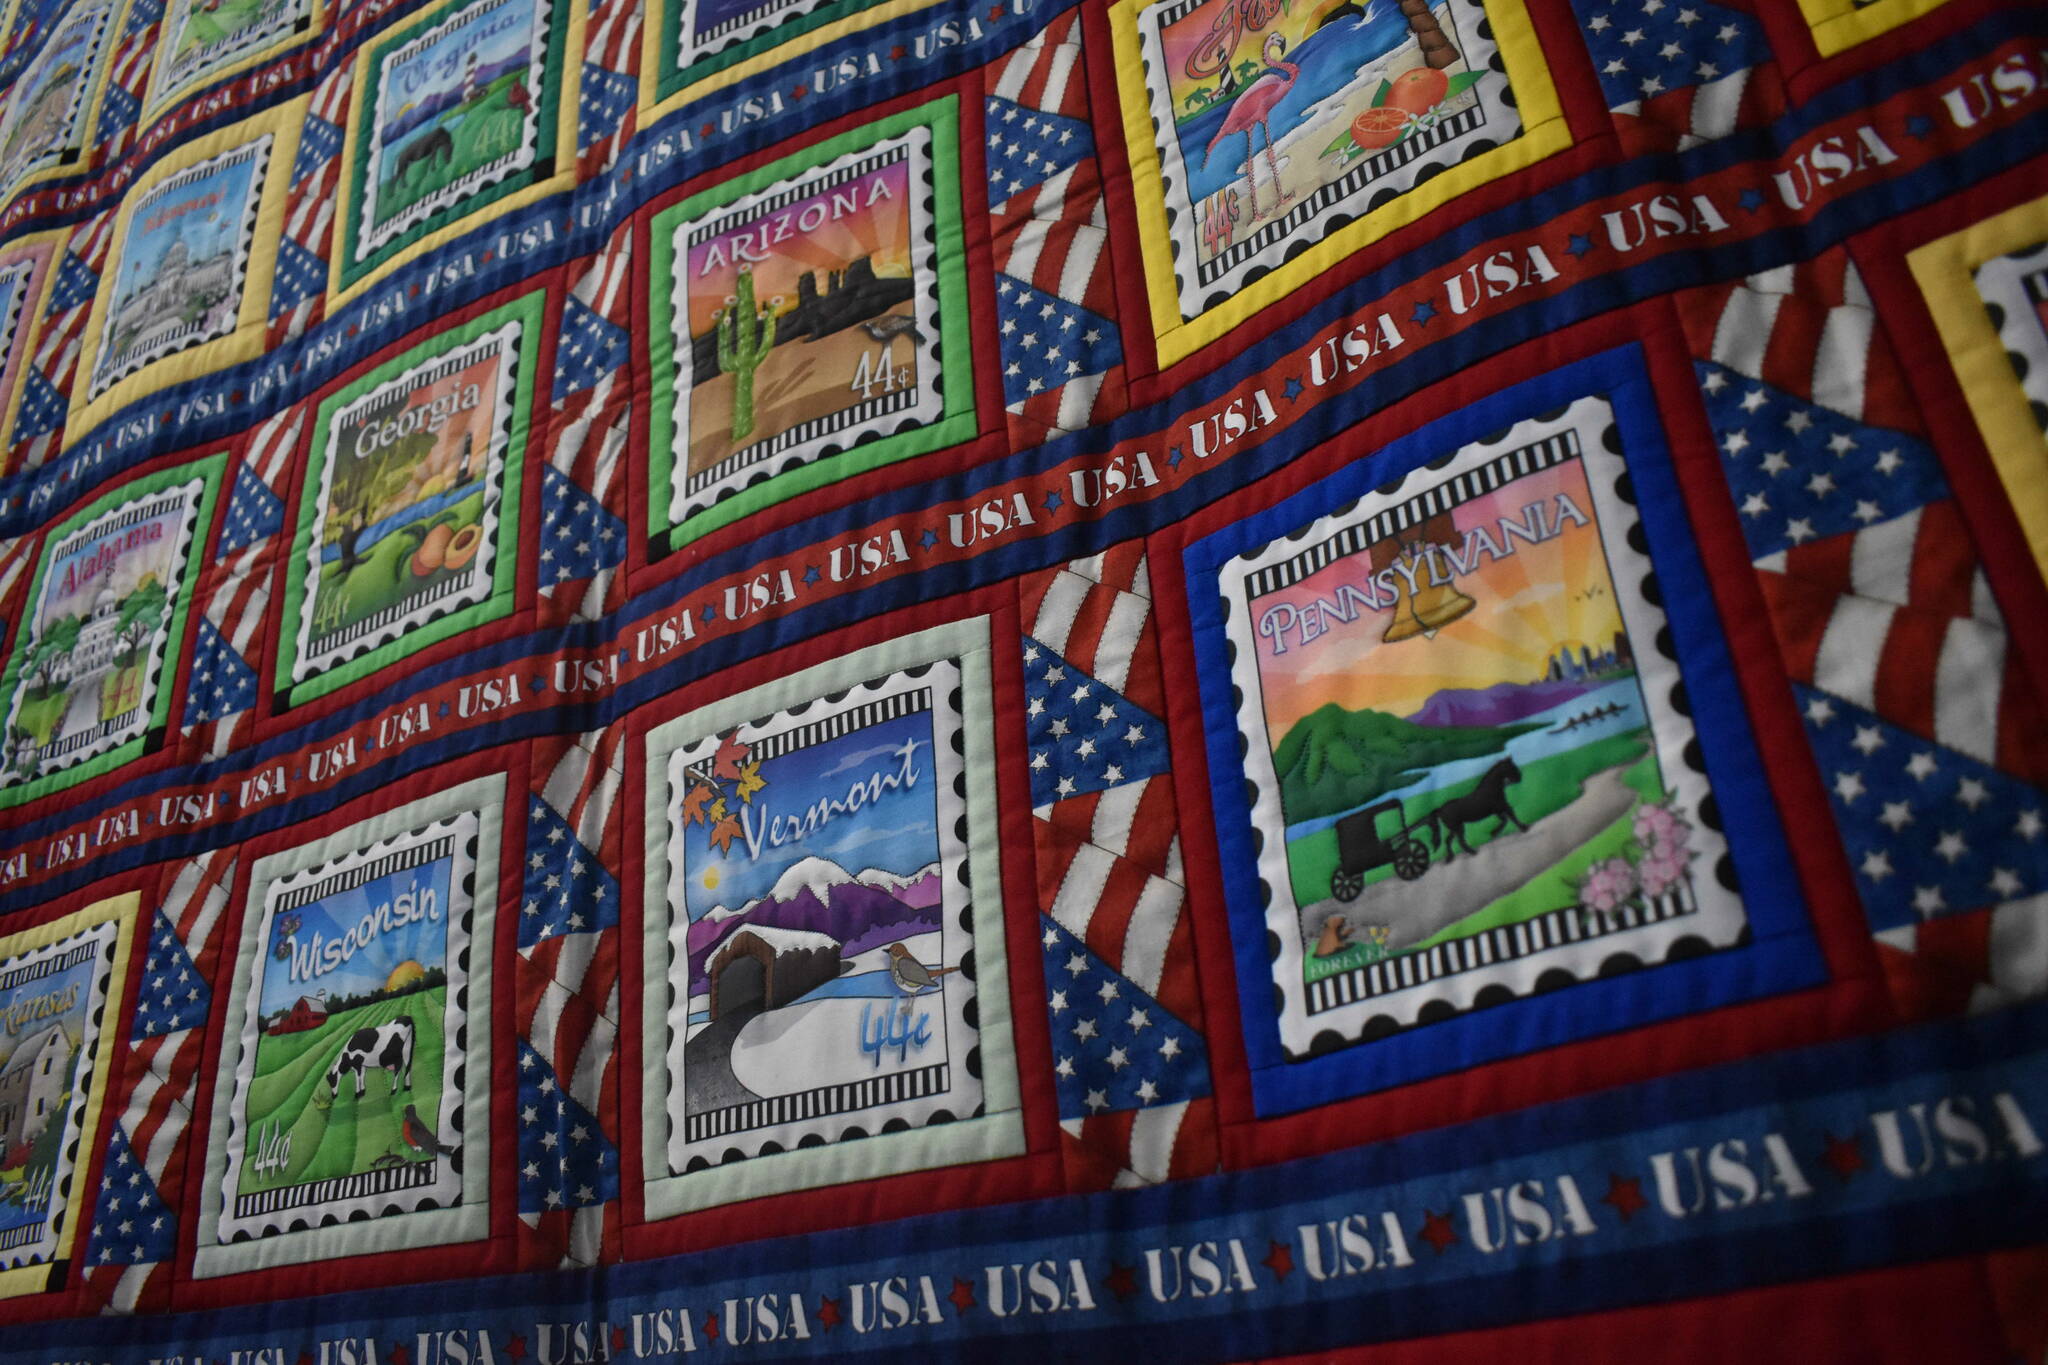 Lisa Larkin’s “A Marathoner’s Story” quilt, containing postcard designs from each of the 50 states and several other landmarks, made to commemorate her husband’s marathons in each of those locations.